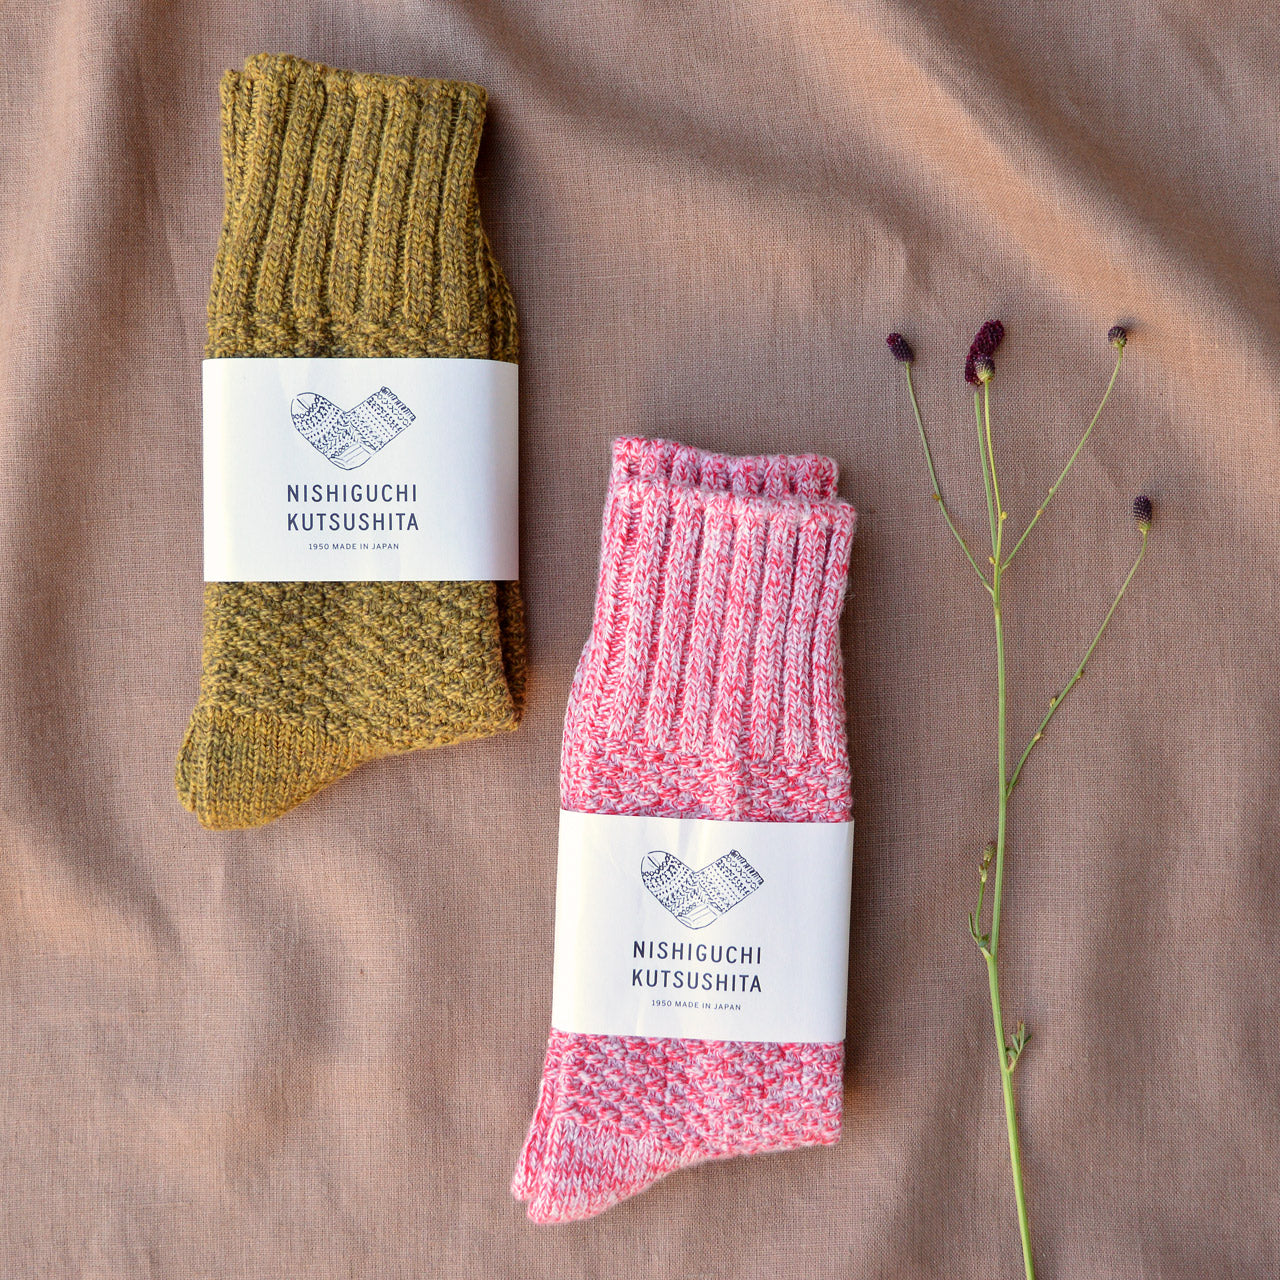 Boot Socks -  Recycled Wool/Cotton (Adults)